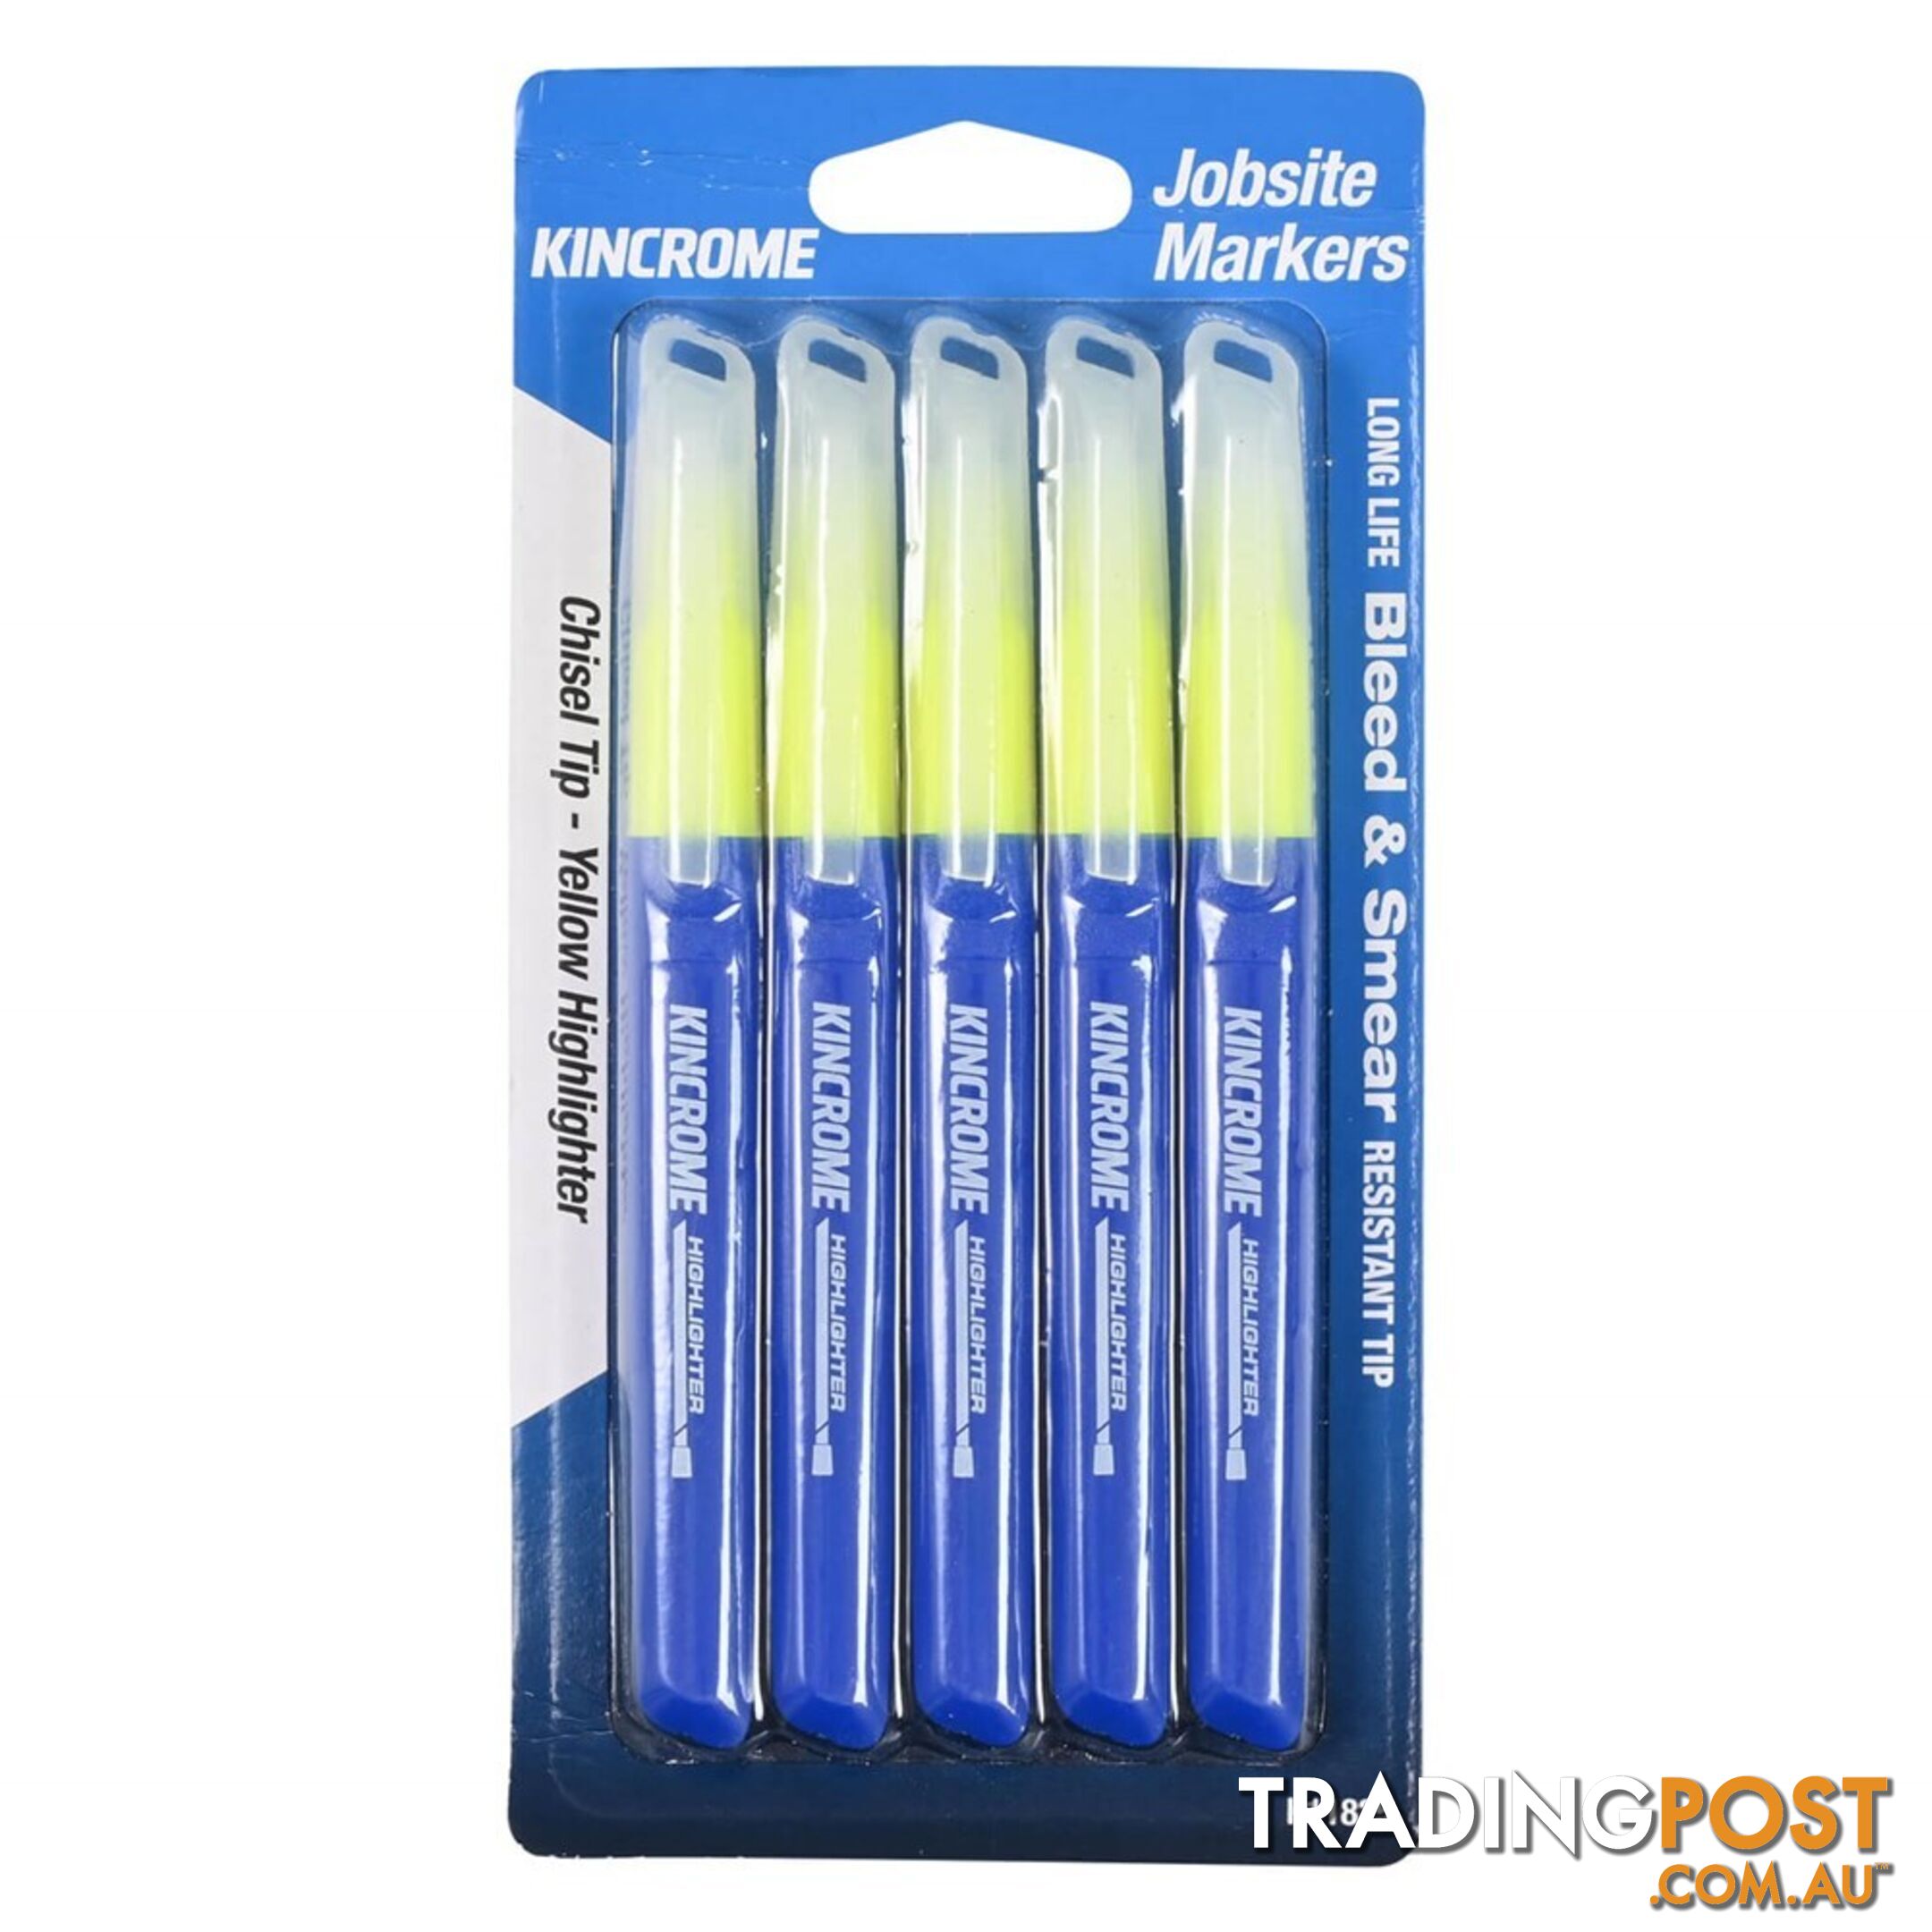 Highlighter Chisel Yellow Tip 5 Pack Kincrome K11825